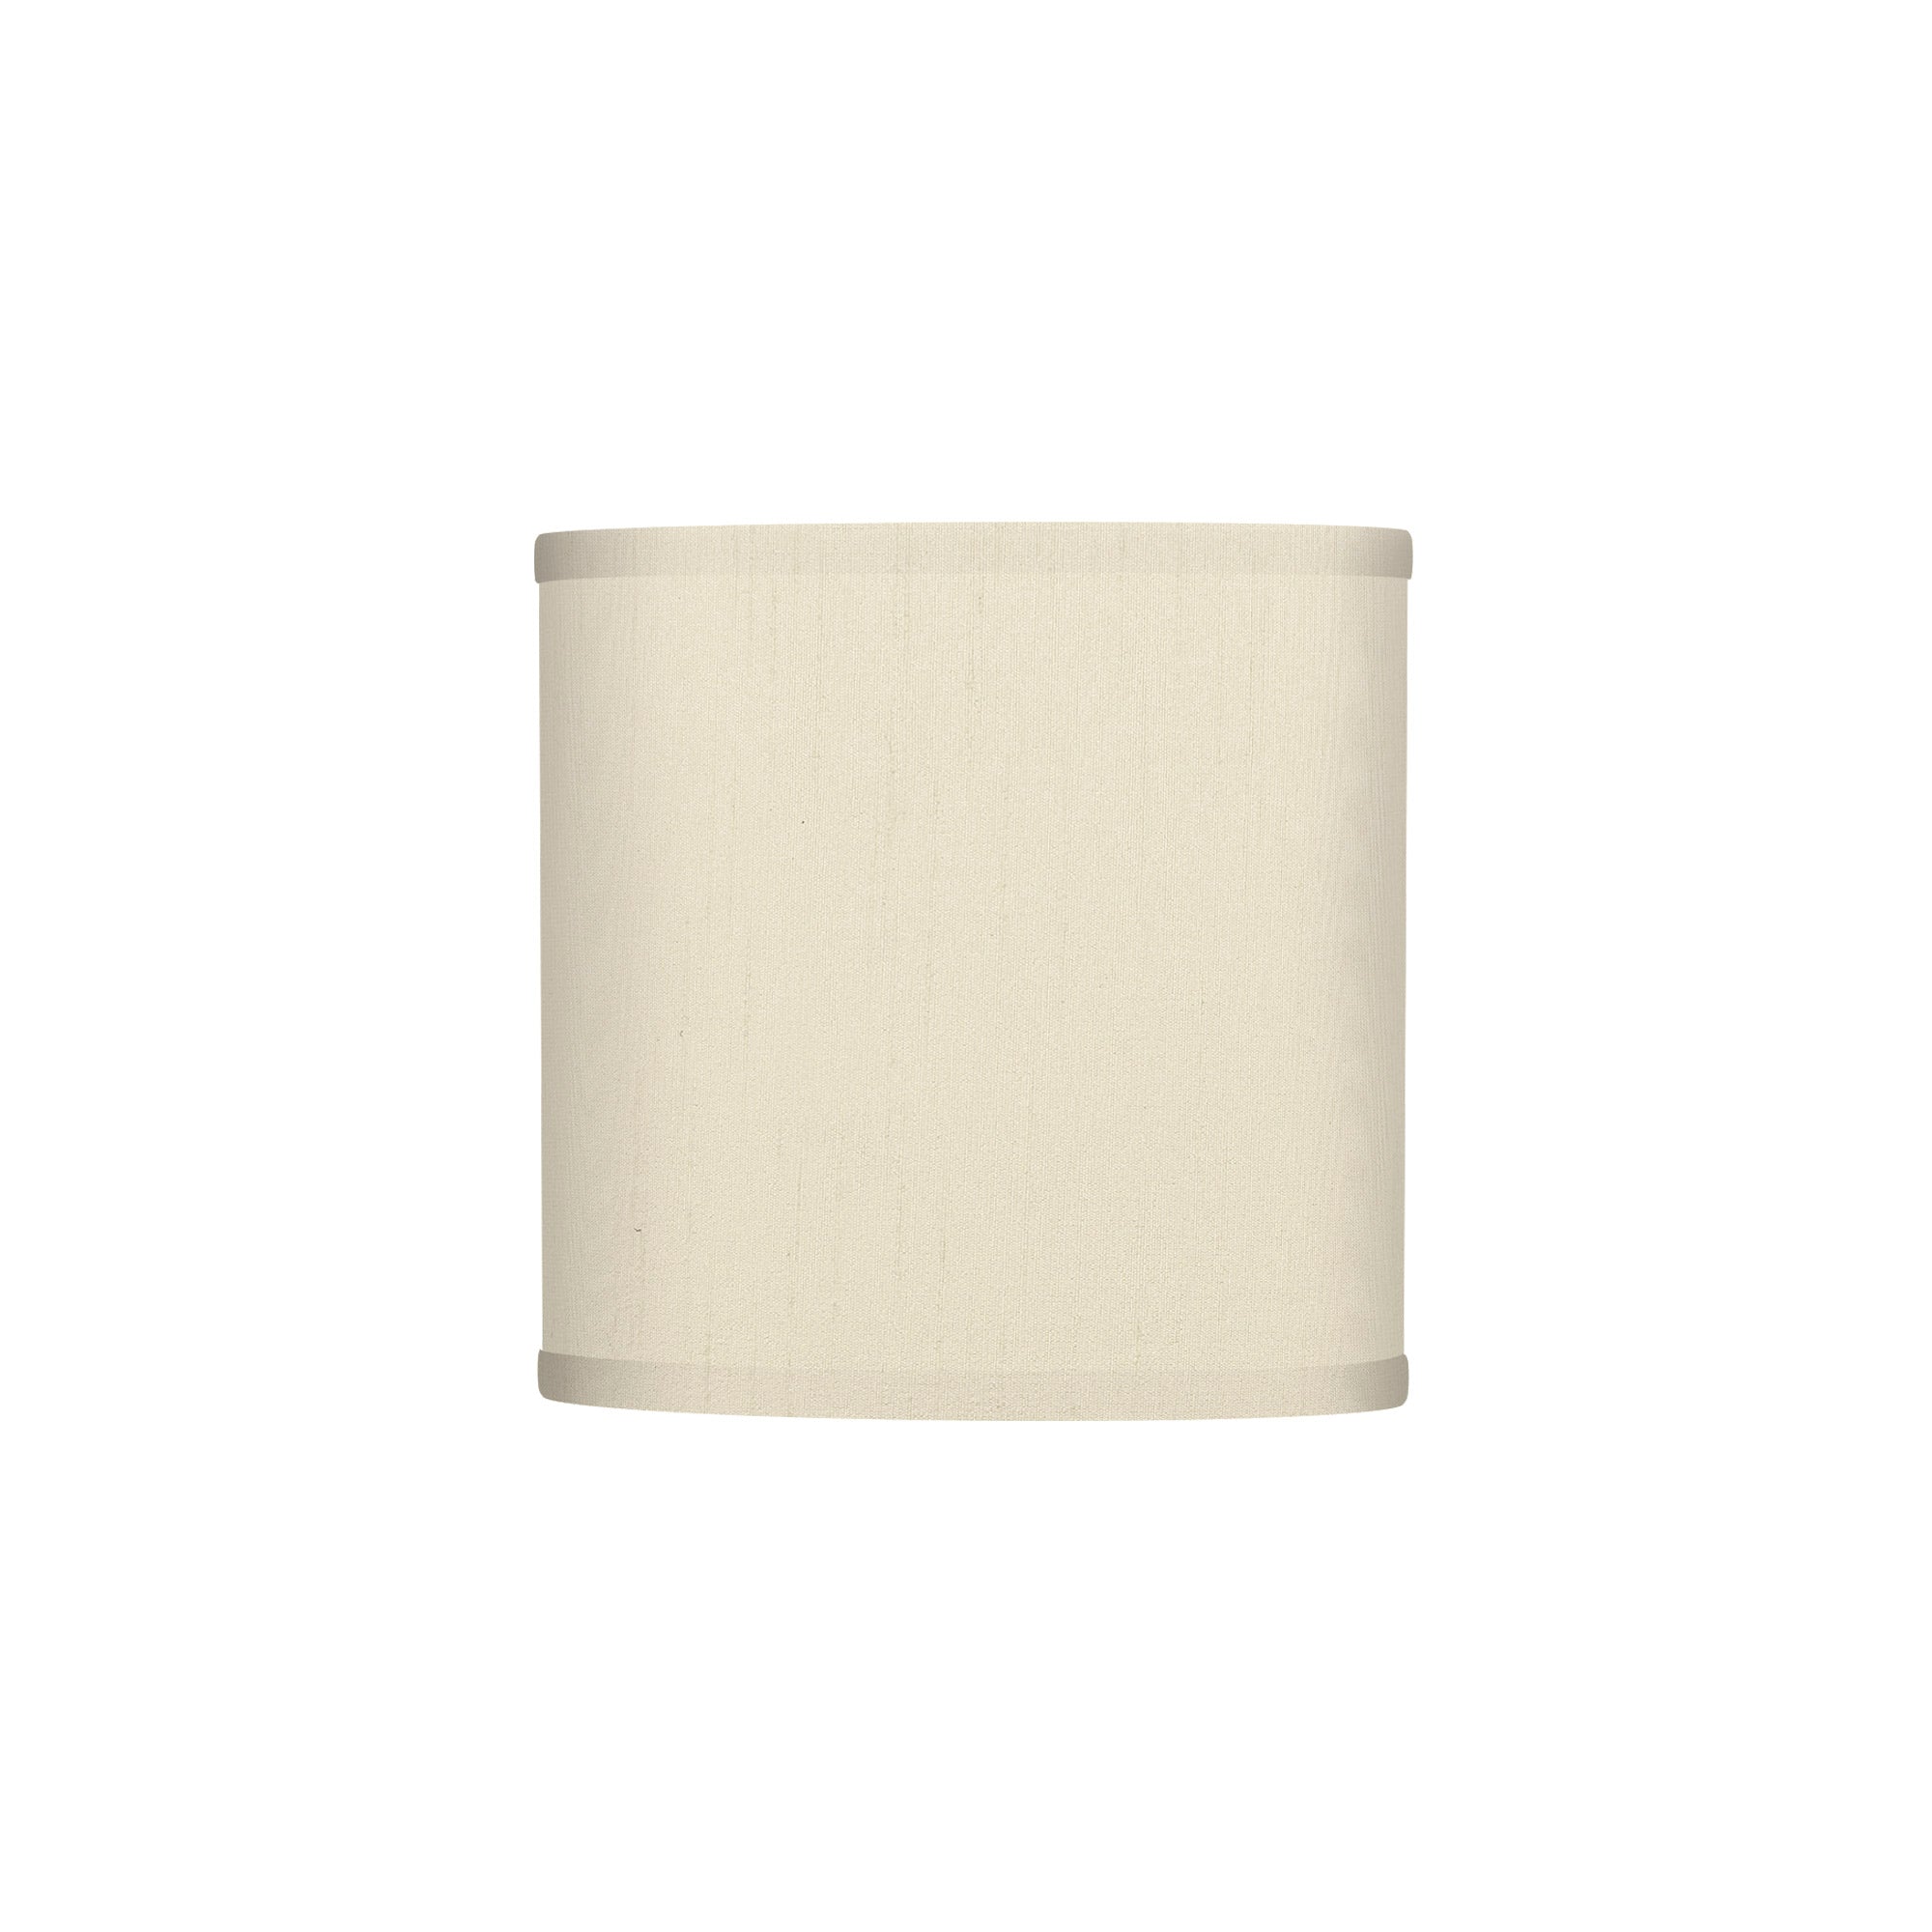 The Bryant Wall Sconce from Seascape Fixtures with a silk shade in cream color.